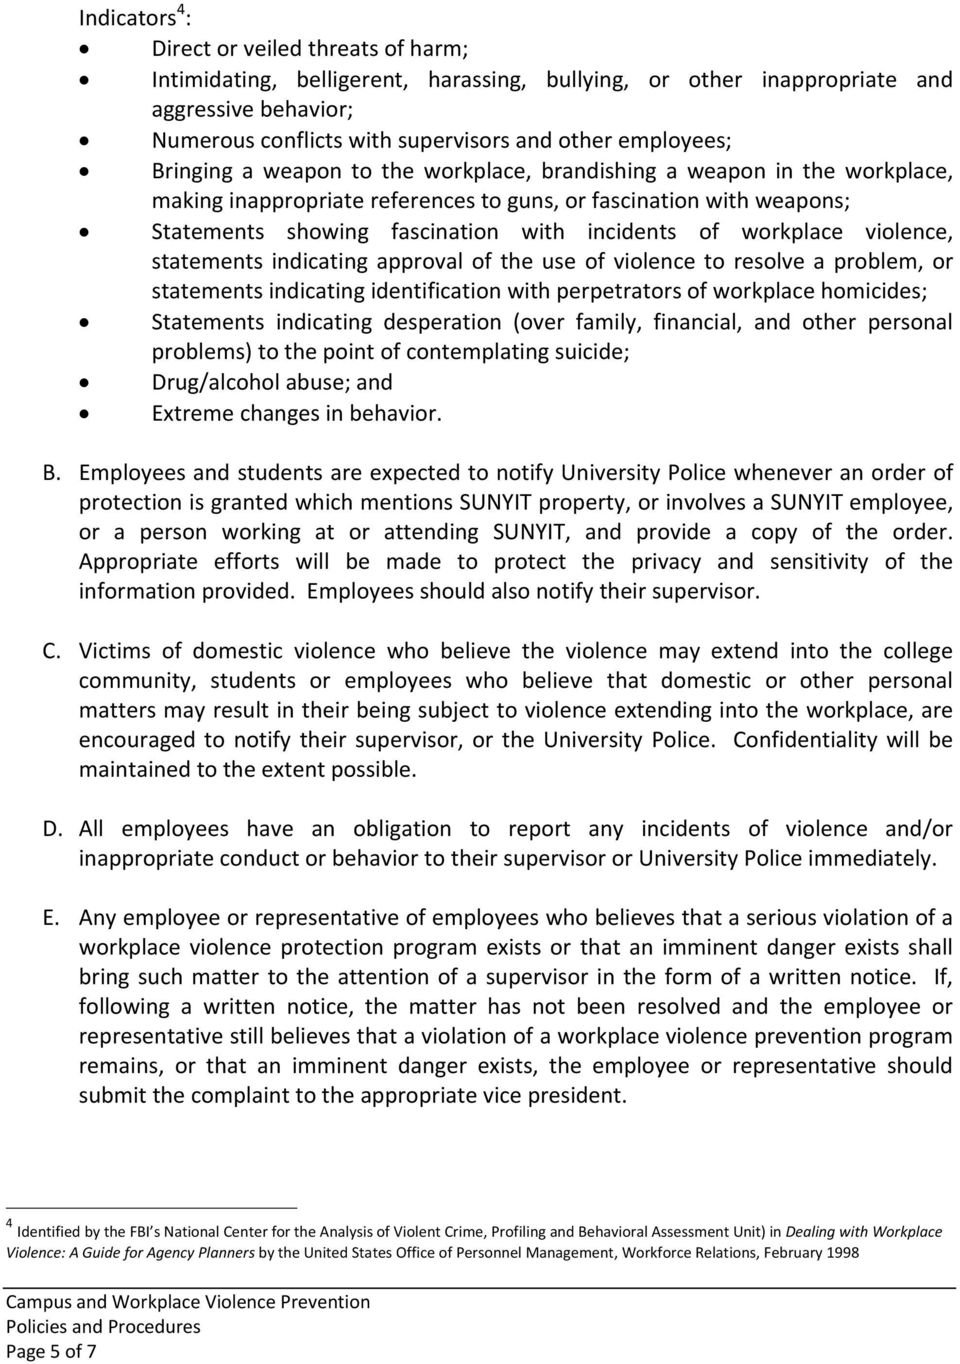 incidents of workplace violence, statements indicating approval of the use of violence to resolve a problem, or statements indicating identification with perpetrators of workplace homicides;